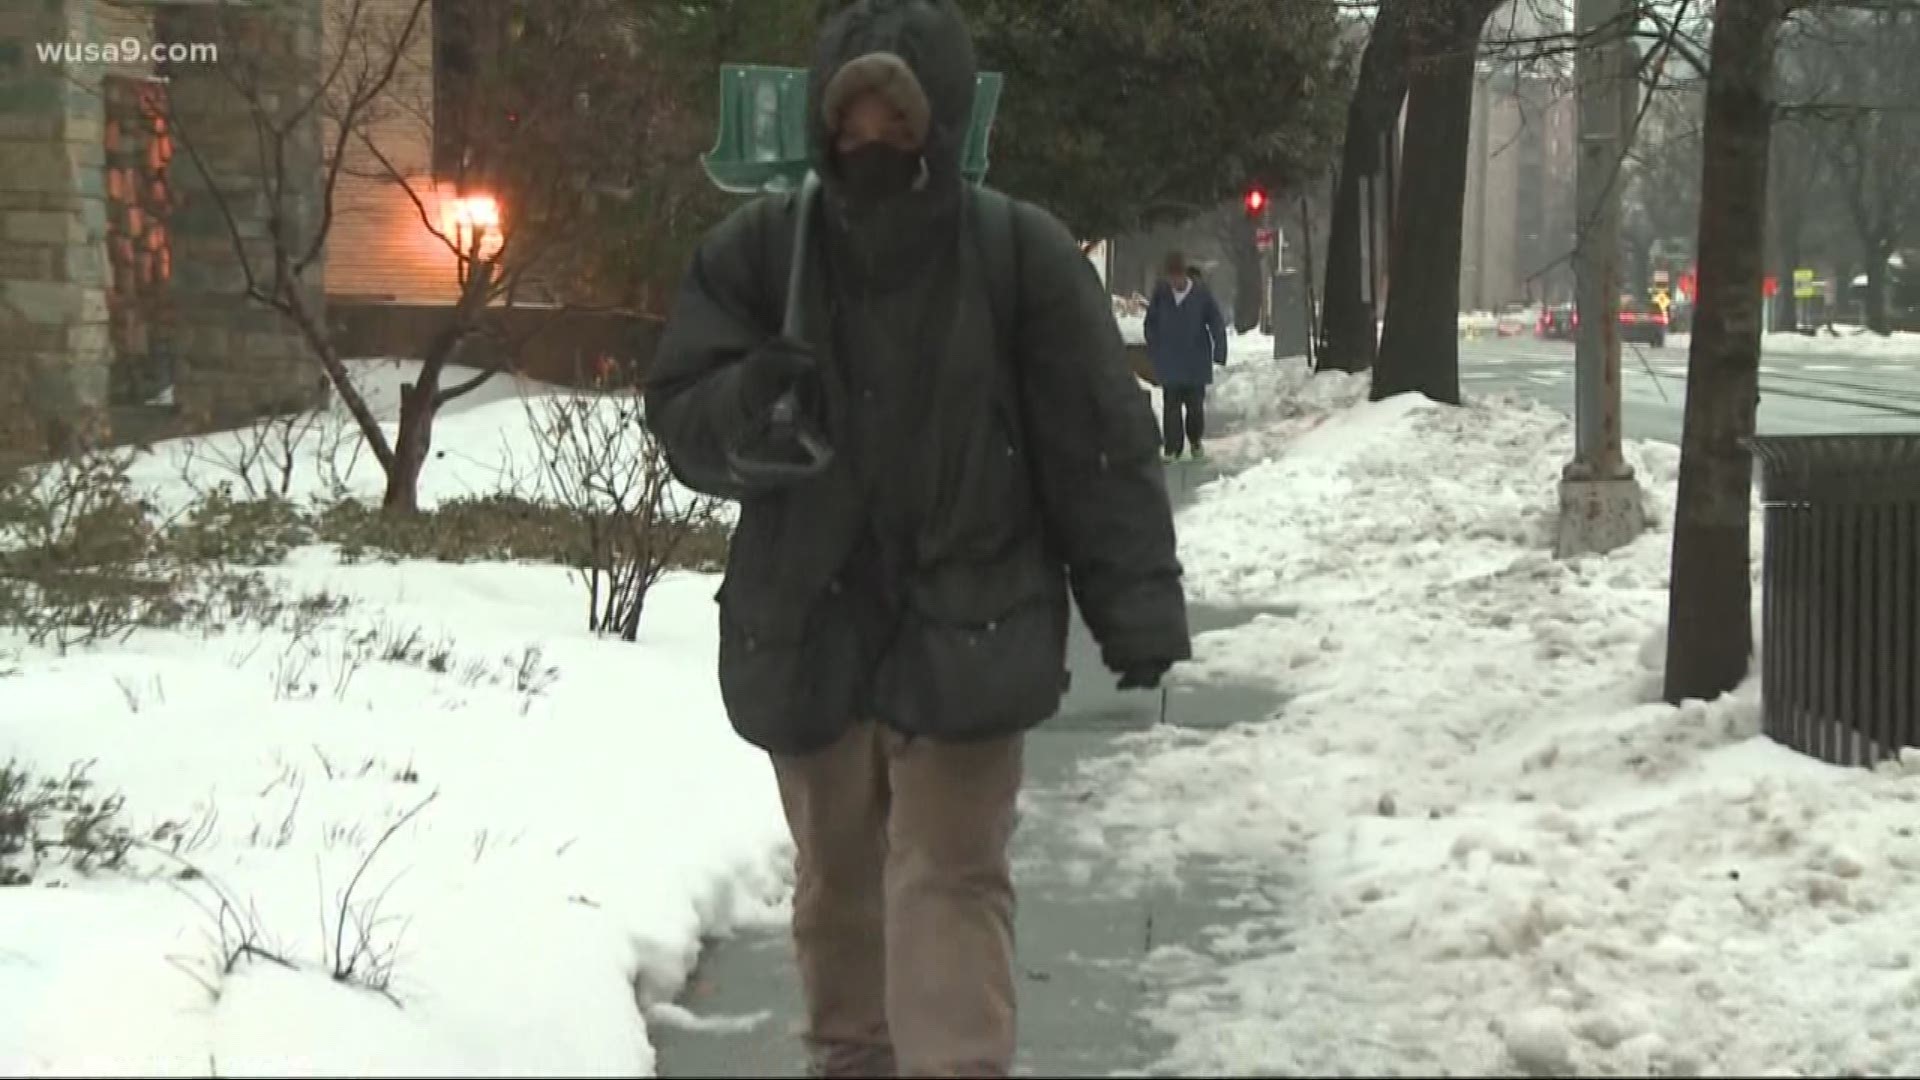 Some sidewalks have not been cleared from this past weekend’s snow storm.